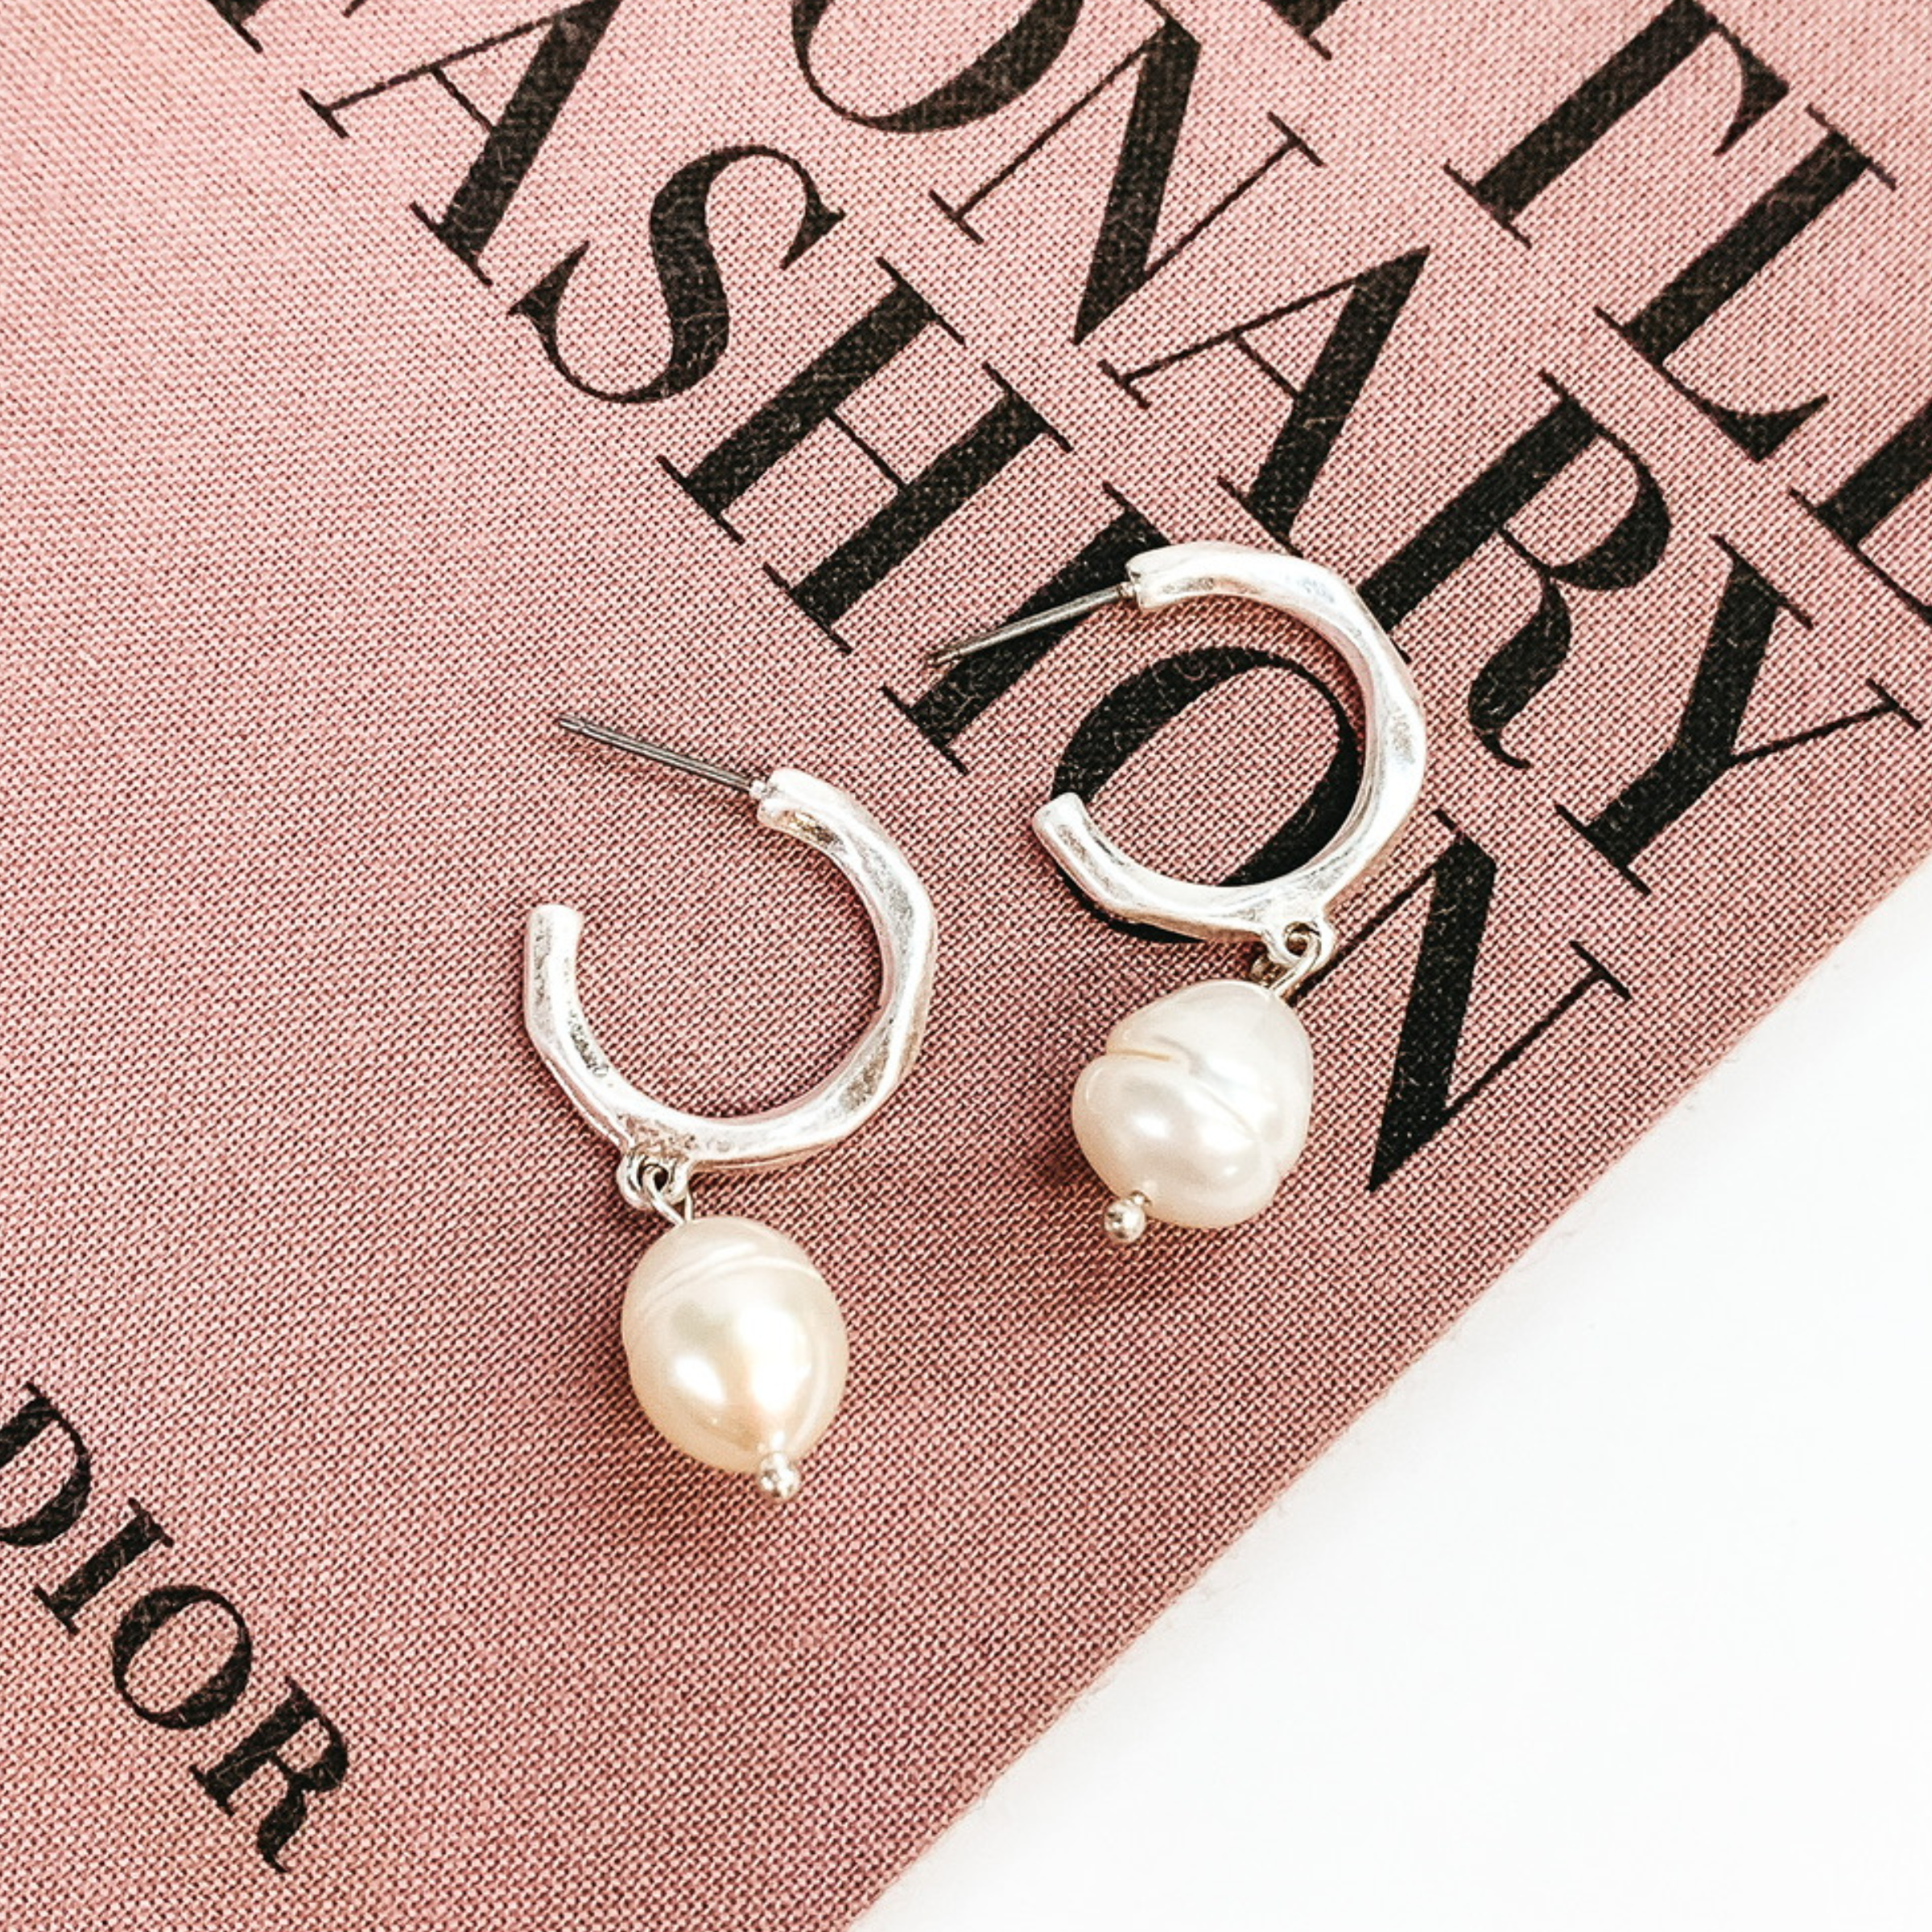 Special Occasion Hoop Earring with Pearl Dangle in Worn Silver Tone - Giddy Up Glamour Boutique